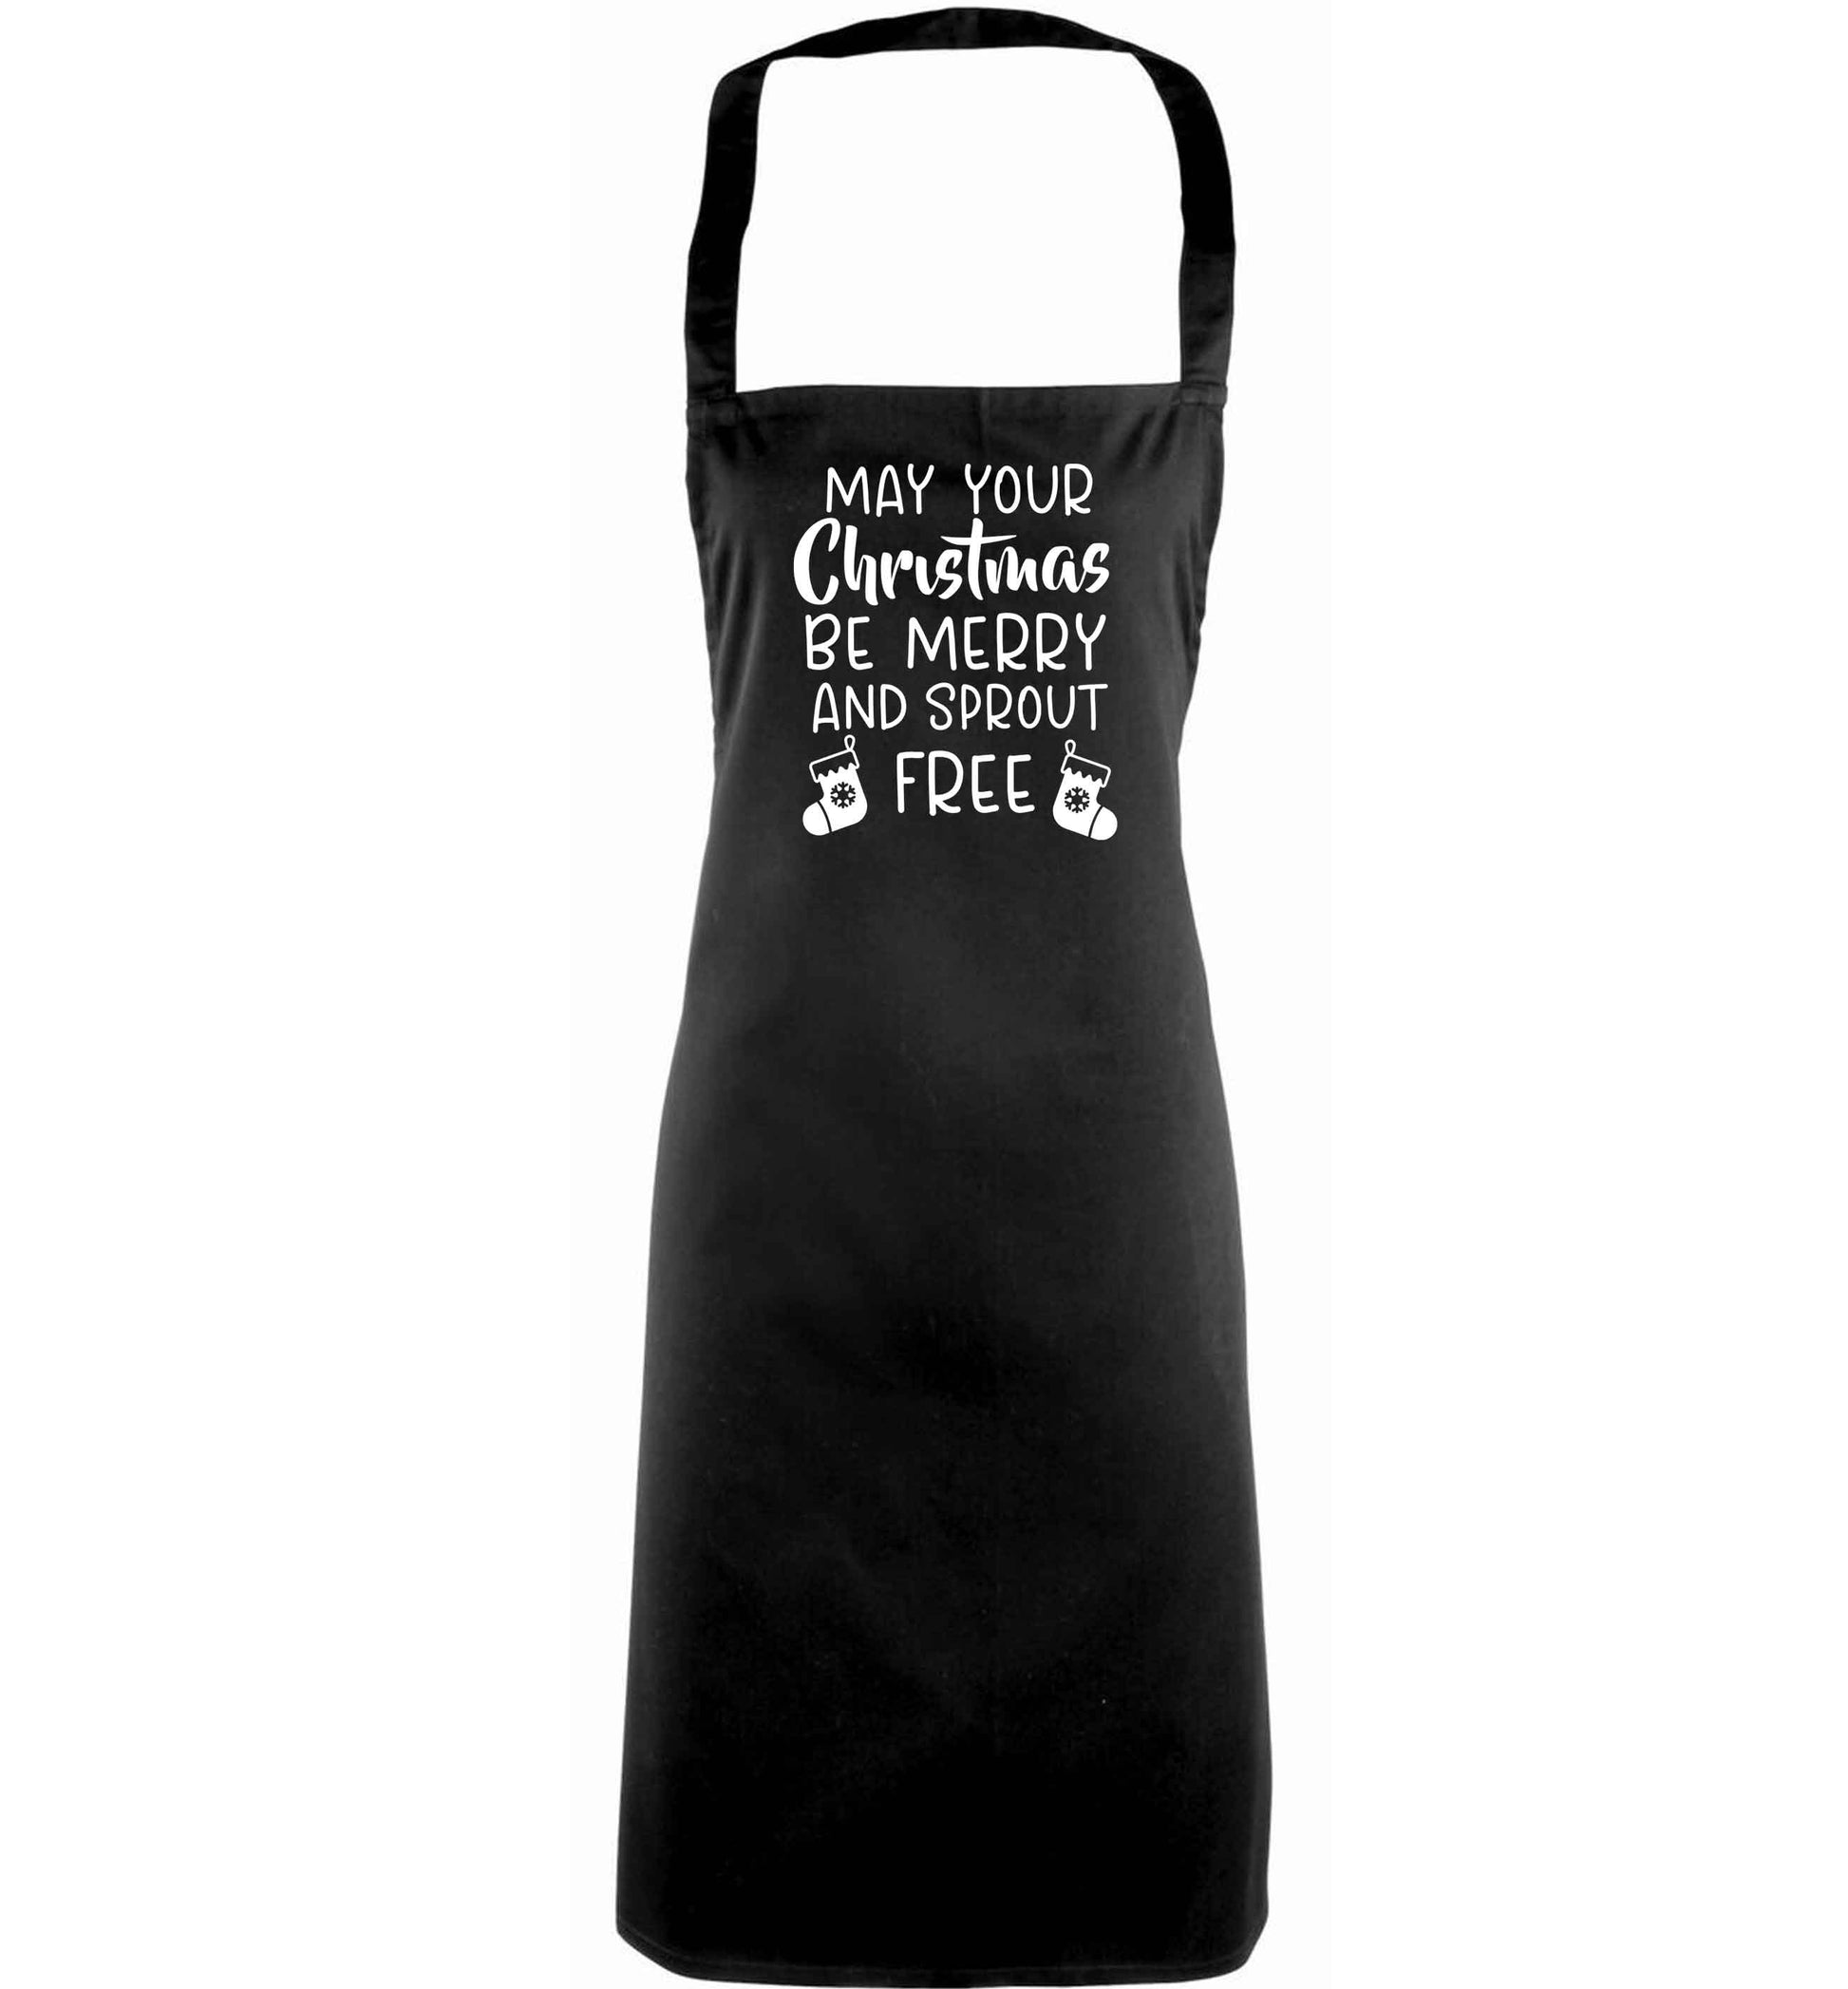 May your Christmas be merry and sprout free adults black apron